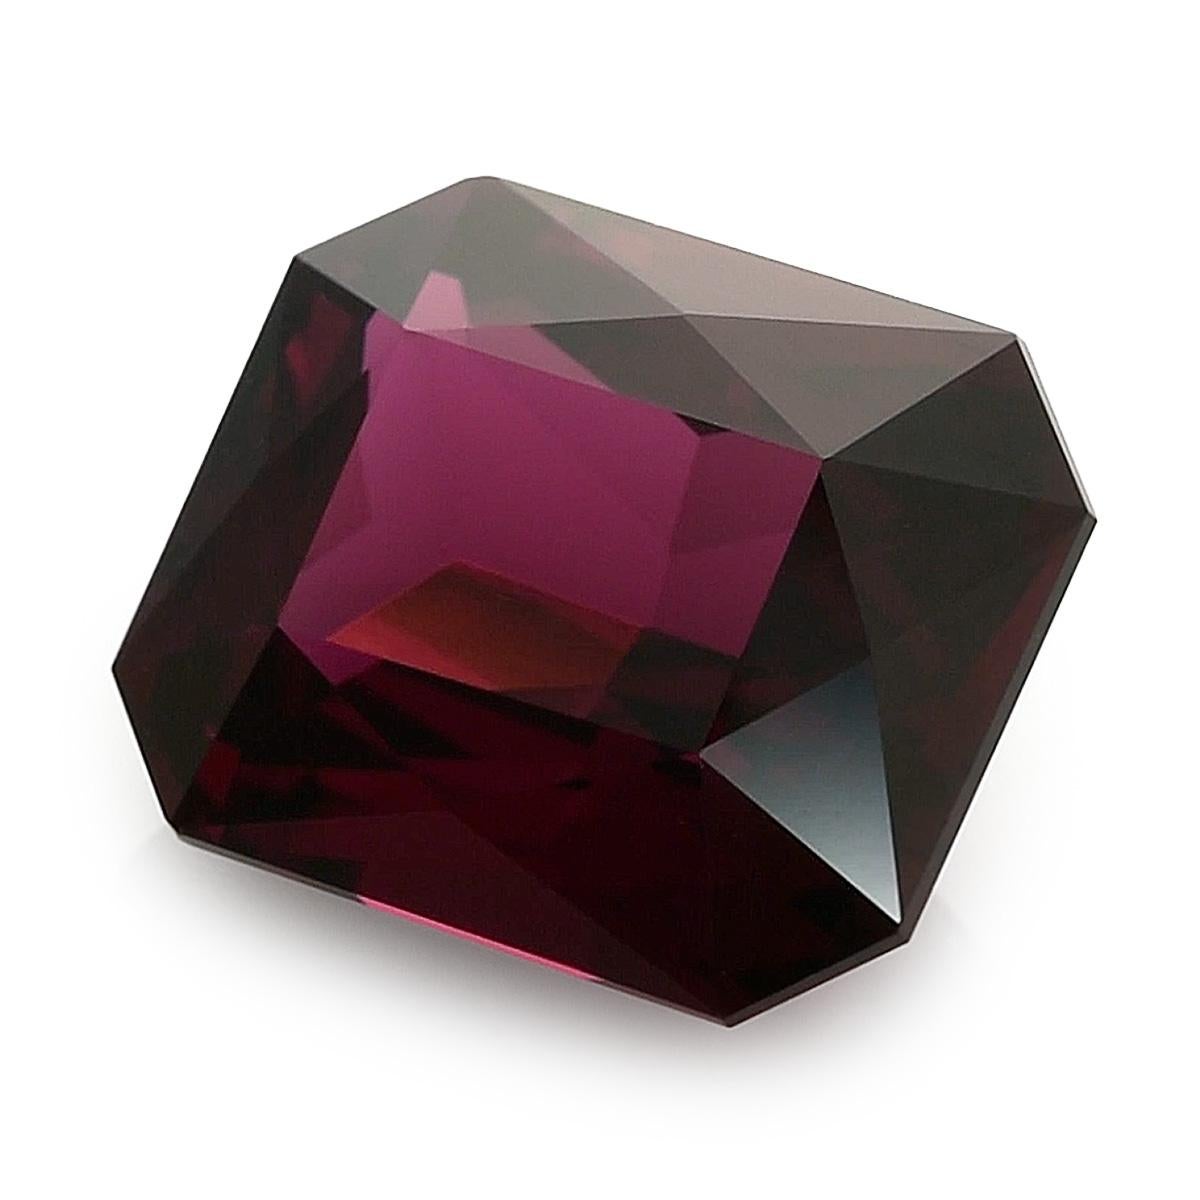 Introducing a stunning Natural Garnet with a carat weight of 17.21 carats, shaped in an elegant Emerald cut. The gem showcases precise measurements of 15.89 x 12.87 x 8.35 mm, featuring a Brilliant/Step cut that enhances its brilliance. The